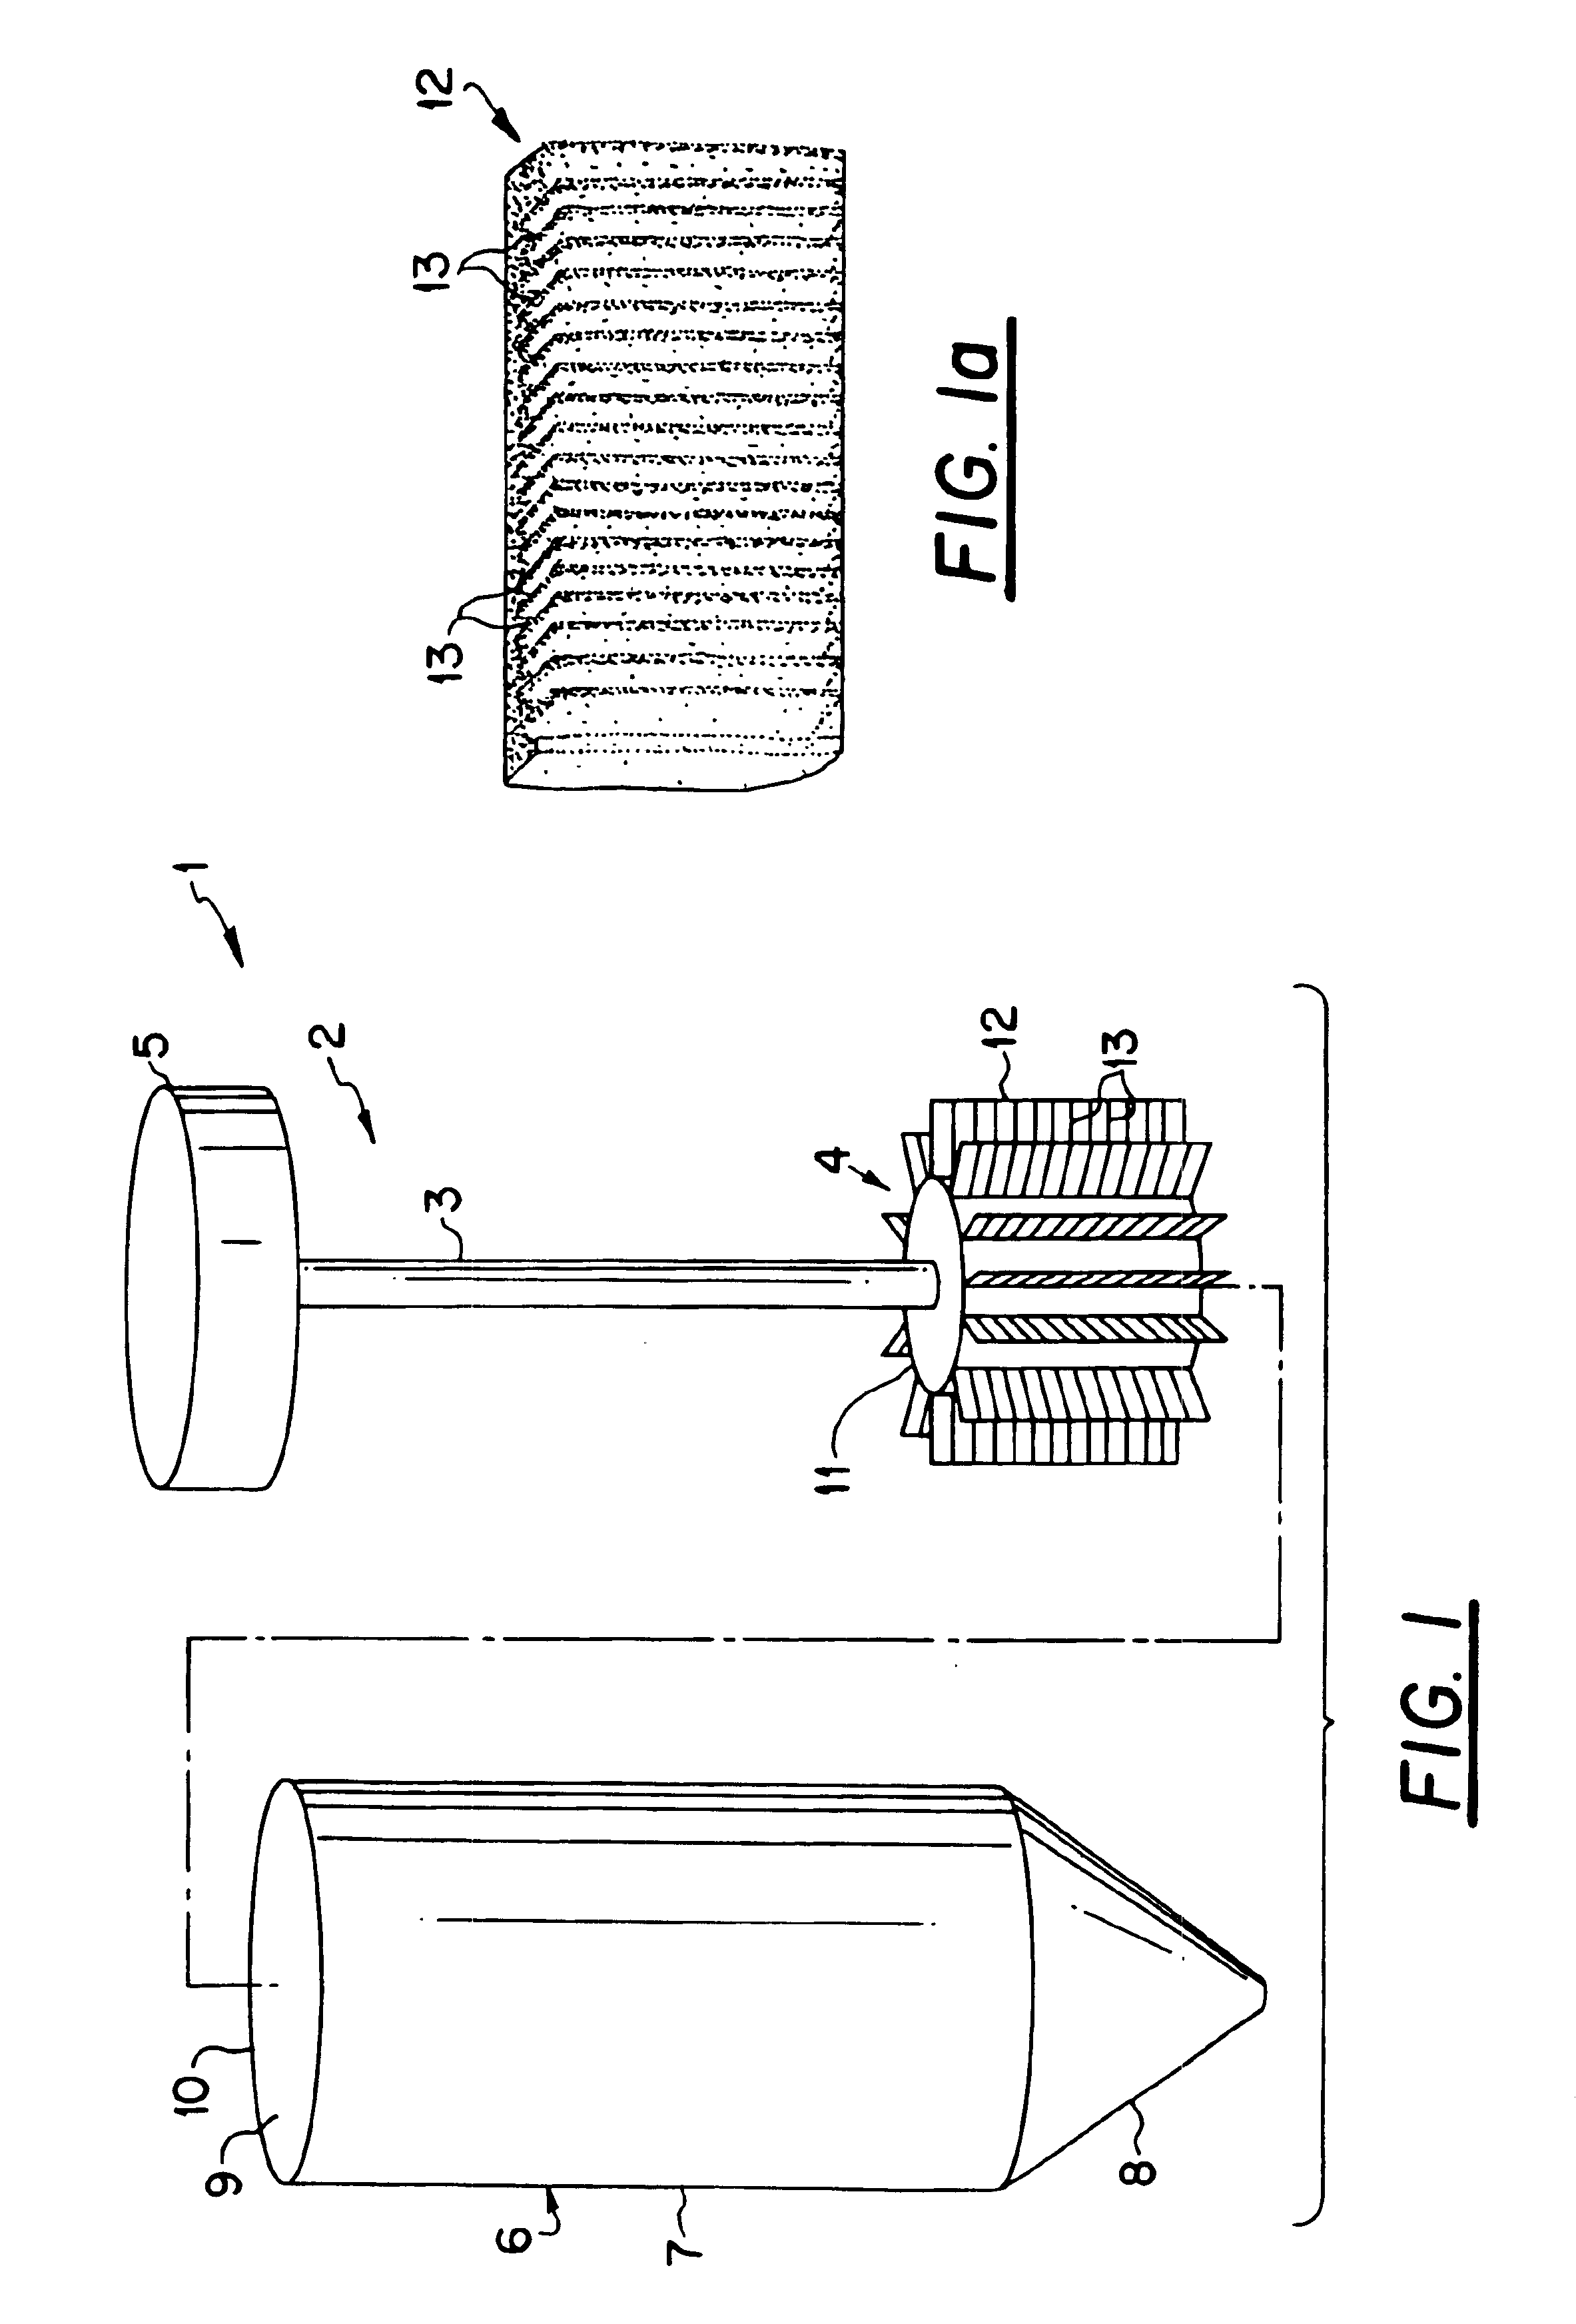 Purification method and apparatus